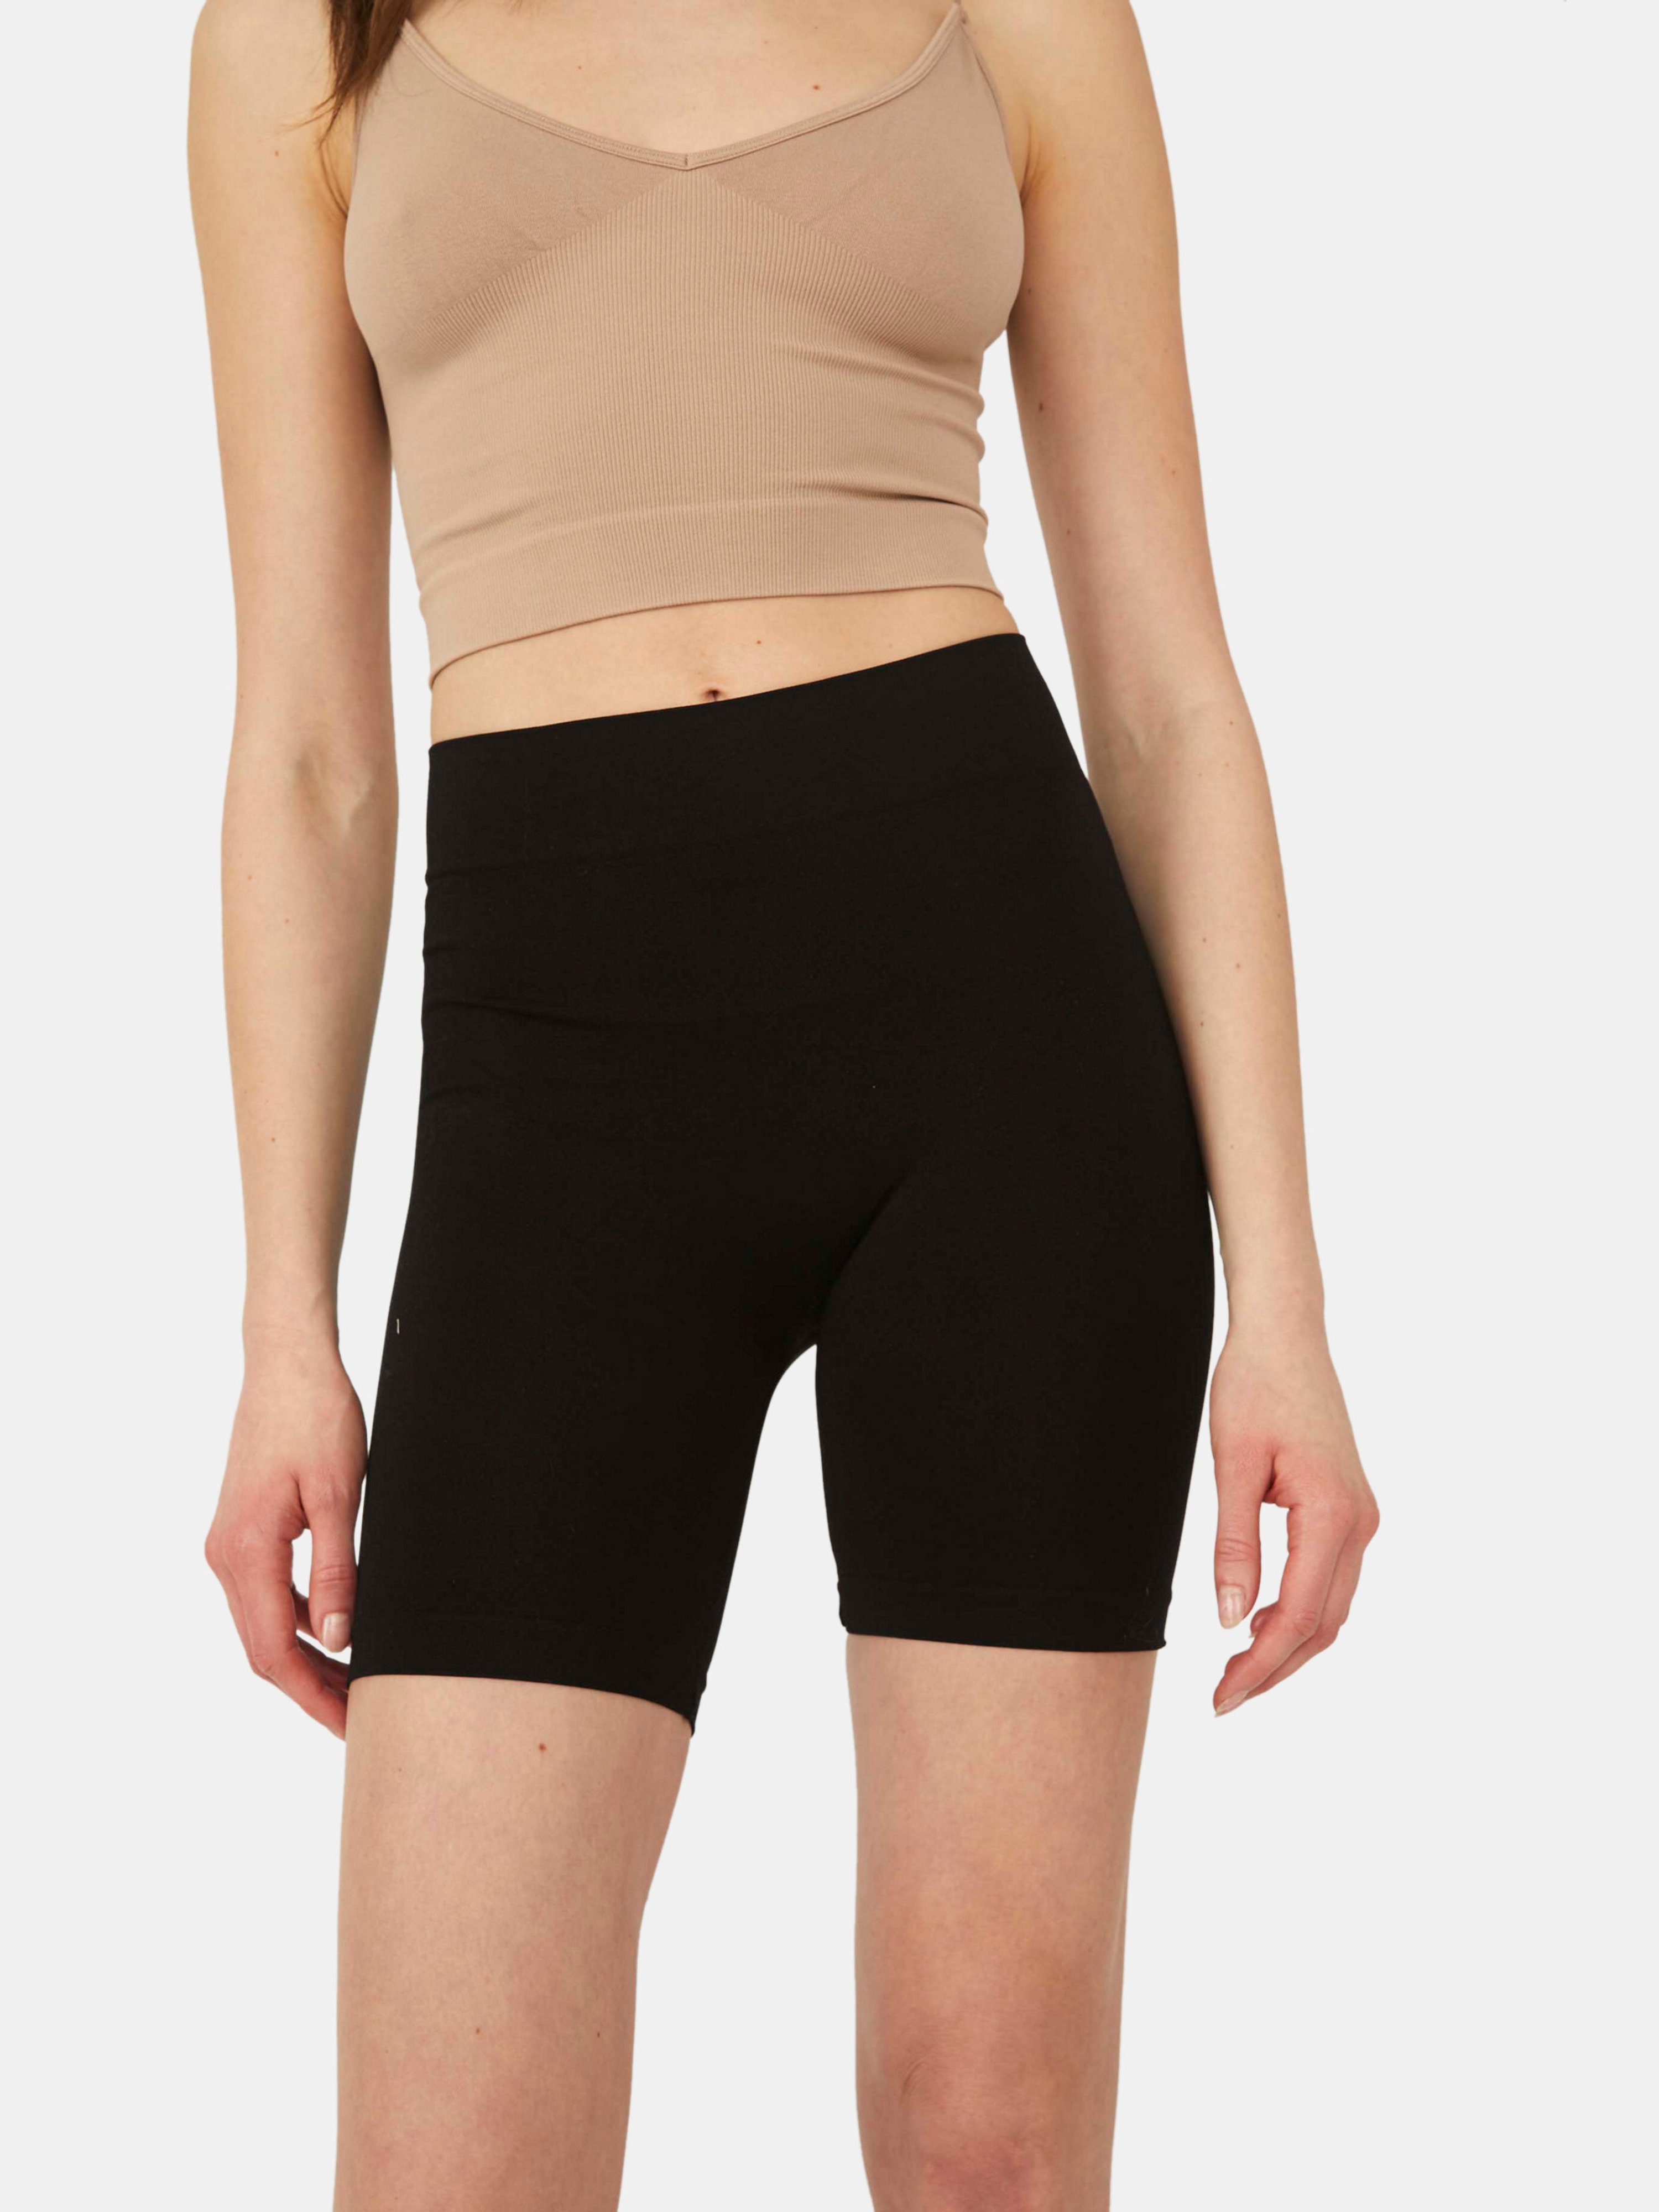 FREE PEOPLE FREE PEOPLE SEAMLESS HIGH RISE SHORTIE